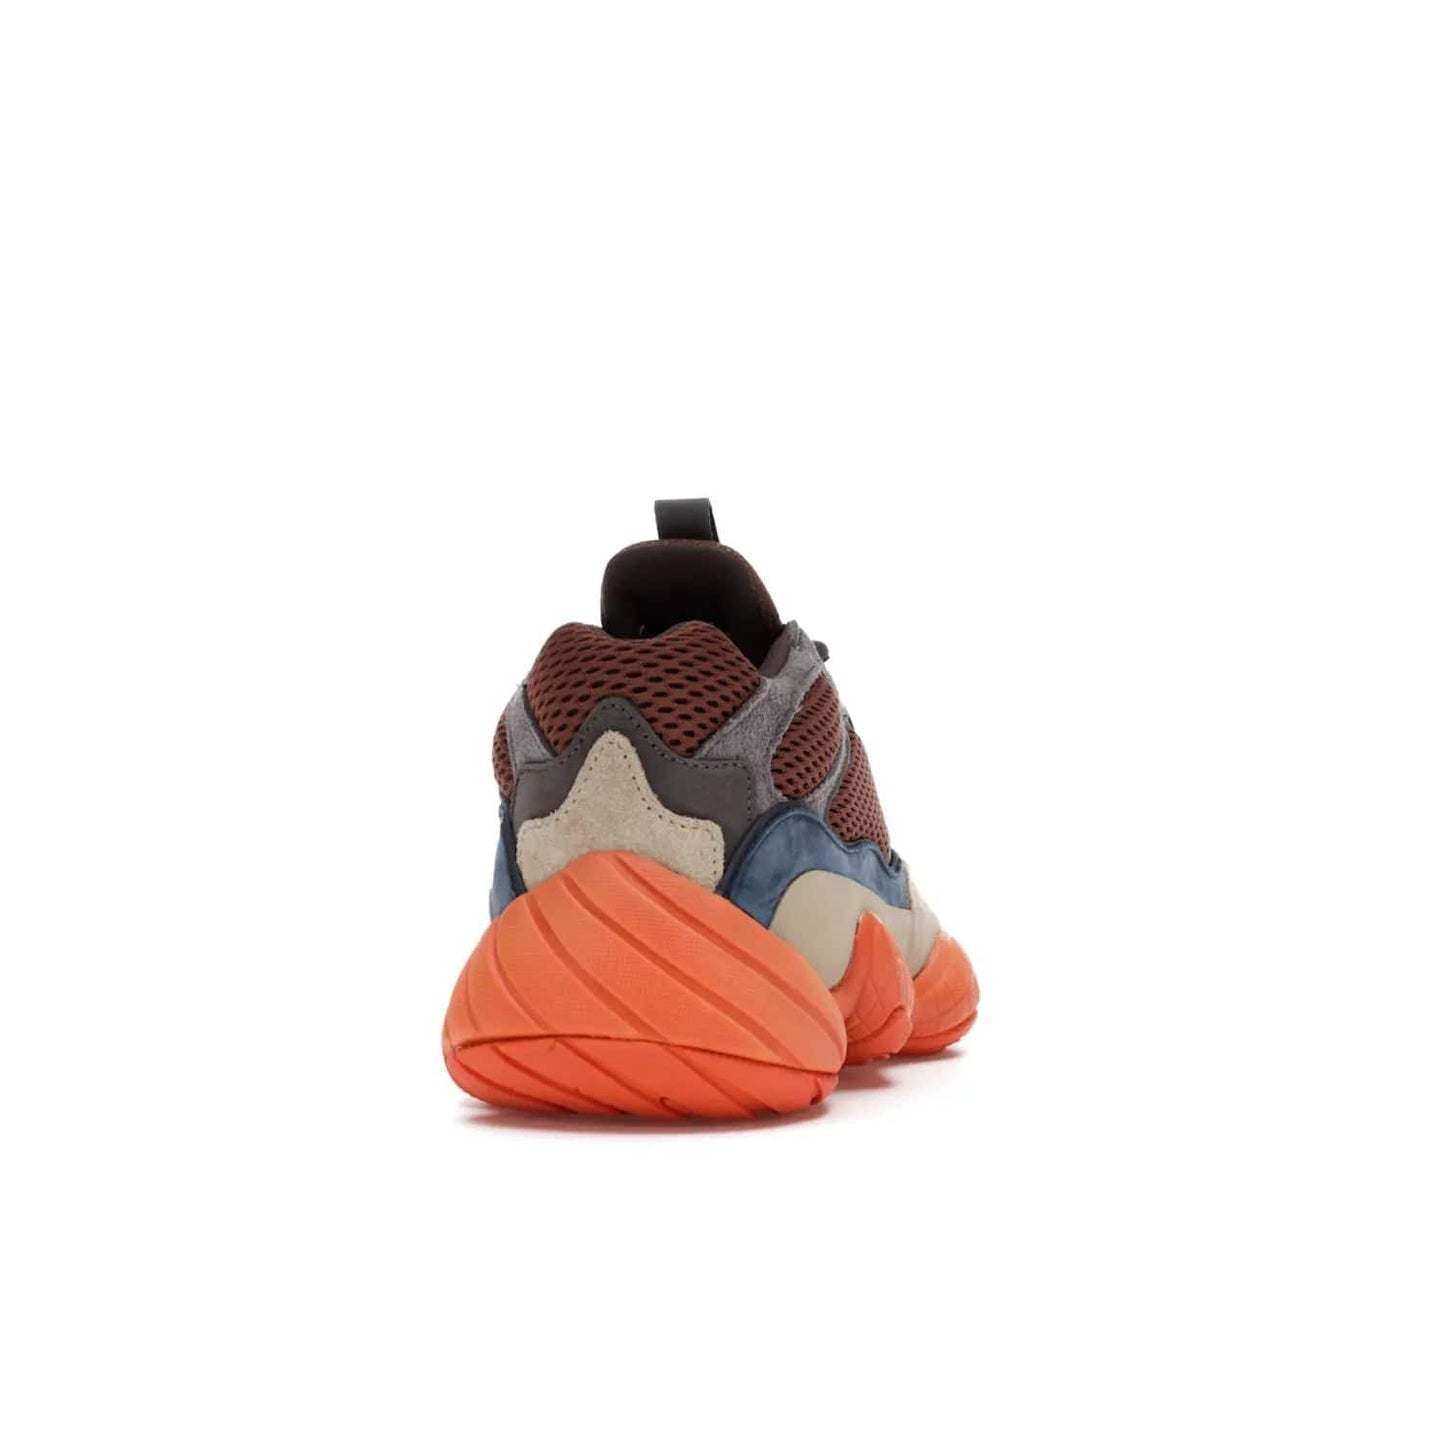 adidas Yeezy 500 Enflame - Image 29 - Only at www.BallersClubKickz.com - Step into style with the adidas Yeezy 500 Enflame. Mix of mesh, leather, and suede layered together to create tonal-brown, dark blue, & orange. Orange AdiPRENE sole provides superior cushioning & comfort. Get yours and experience maximum style.